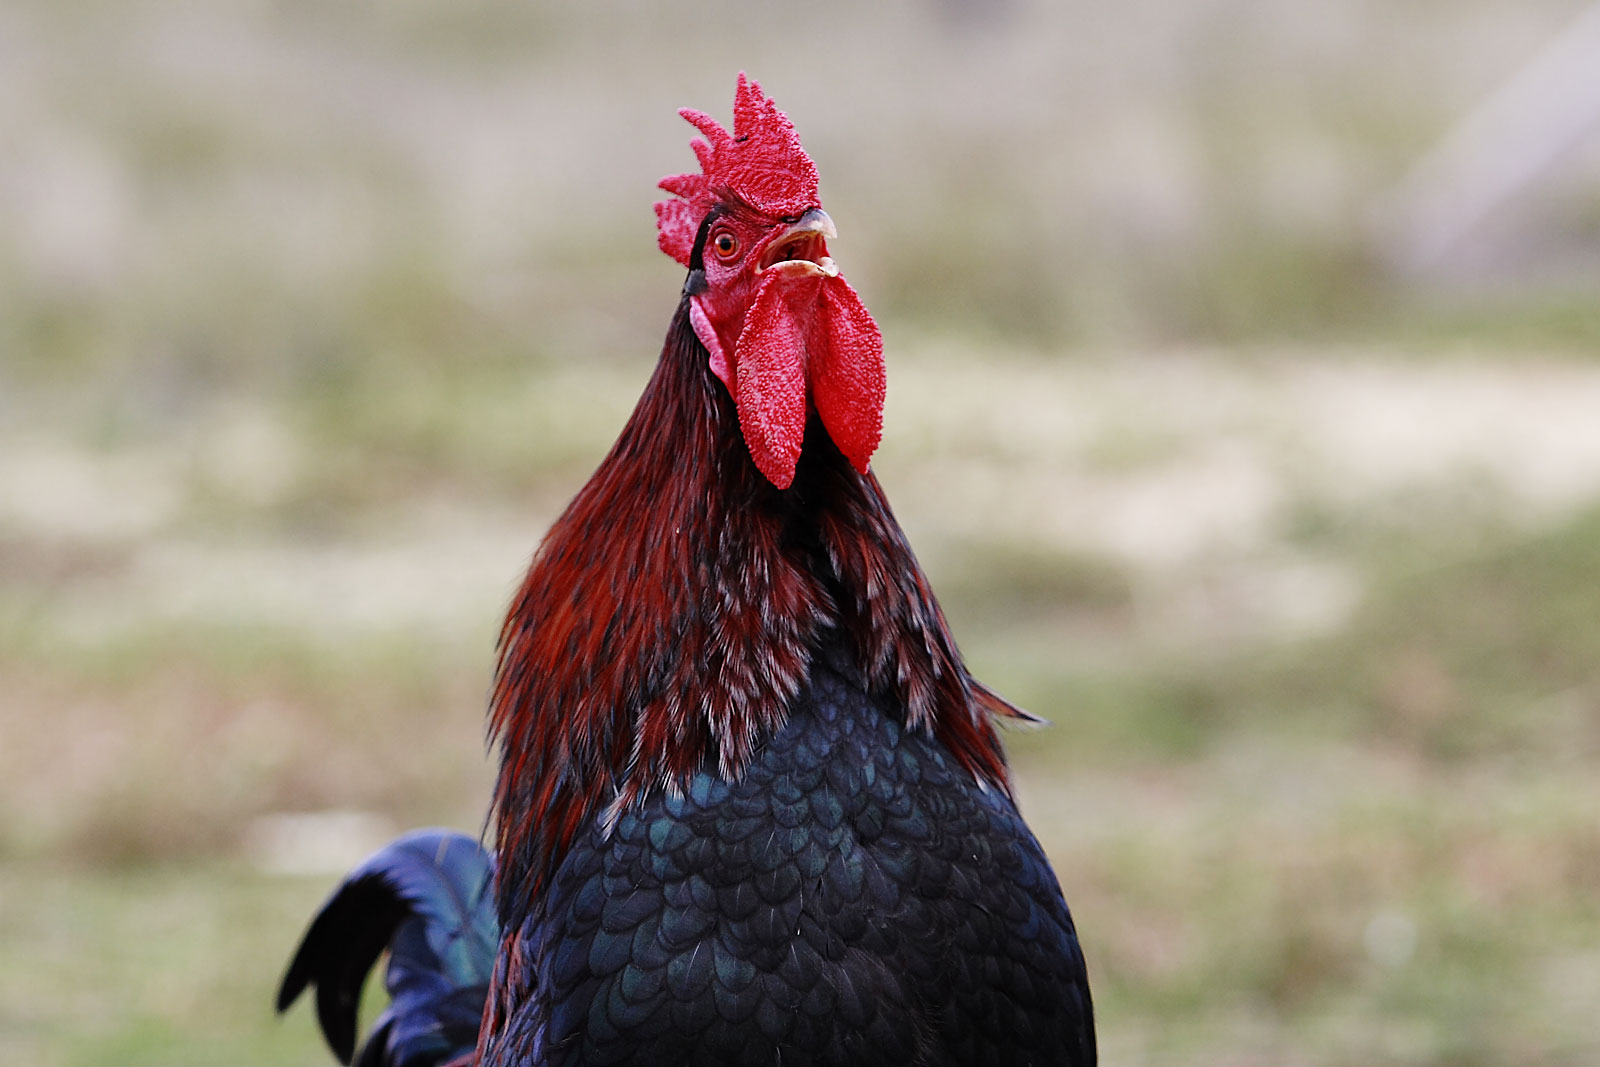 File:Rooster crowing - Wikimedia Commons